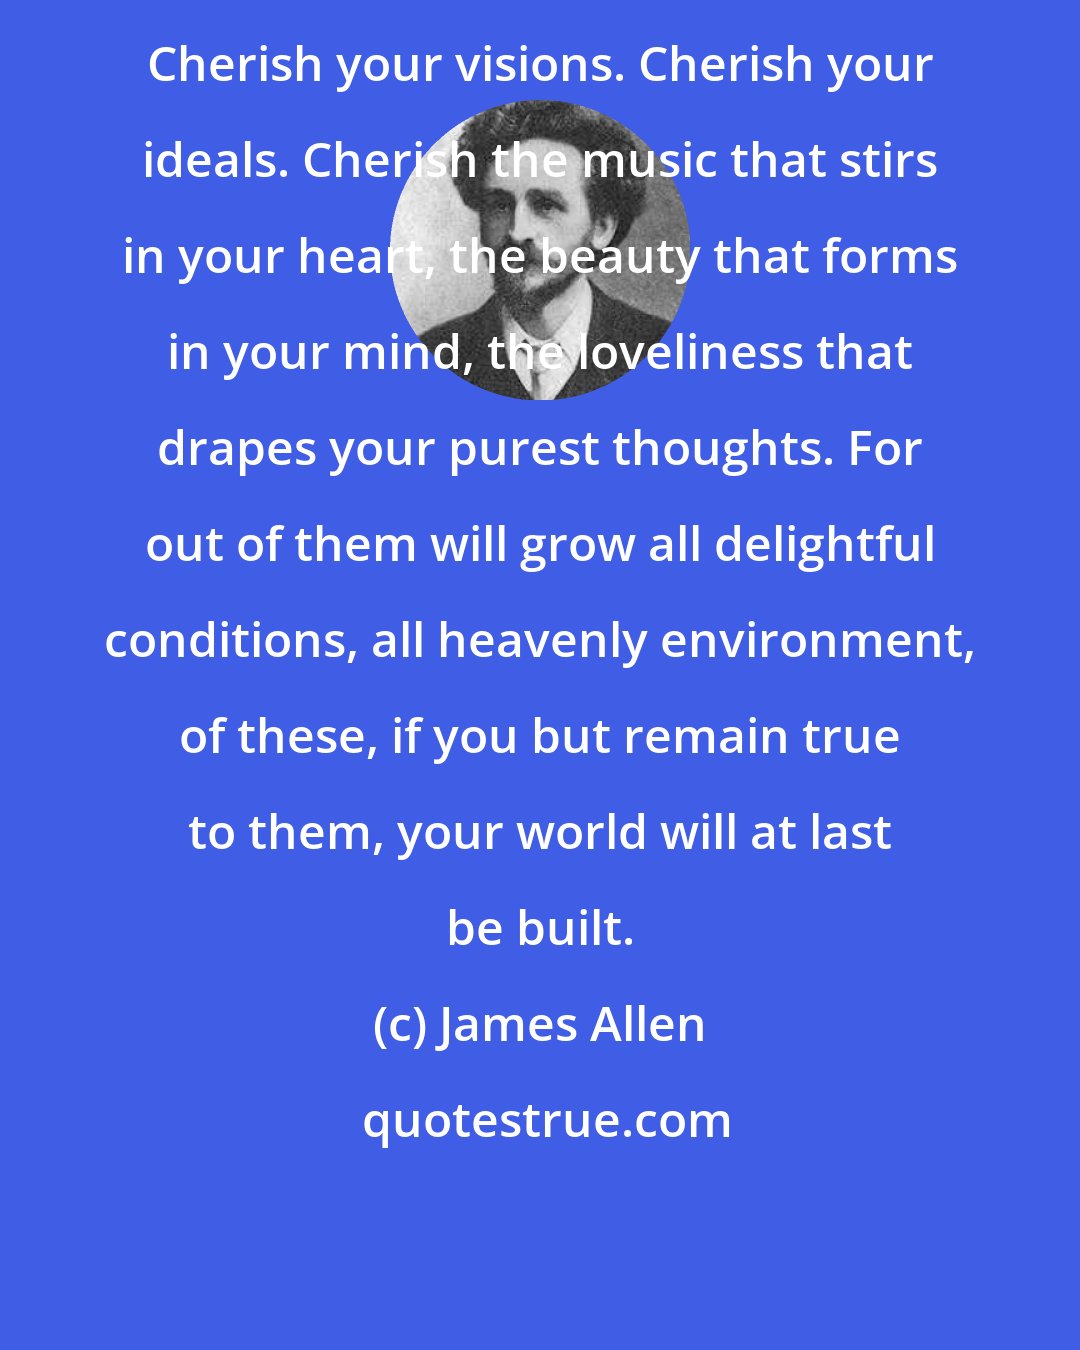 James Allen: Cherish your visions. Cherish your ideals. Cherish the music that stirs in your heart, the beauty that forms in your mind, the loveliness that drapes your purest thoughts. For out of them will grow all delightful conditions, all heavenly environment, of these, if you but remain true to them, your world will at last be built.